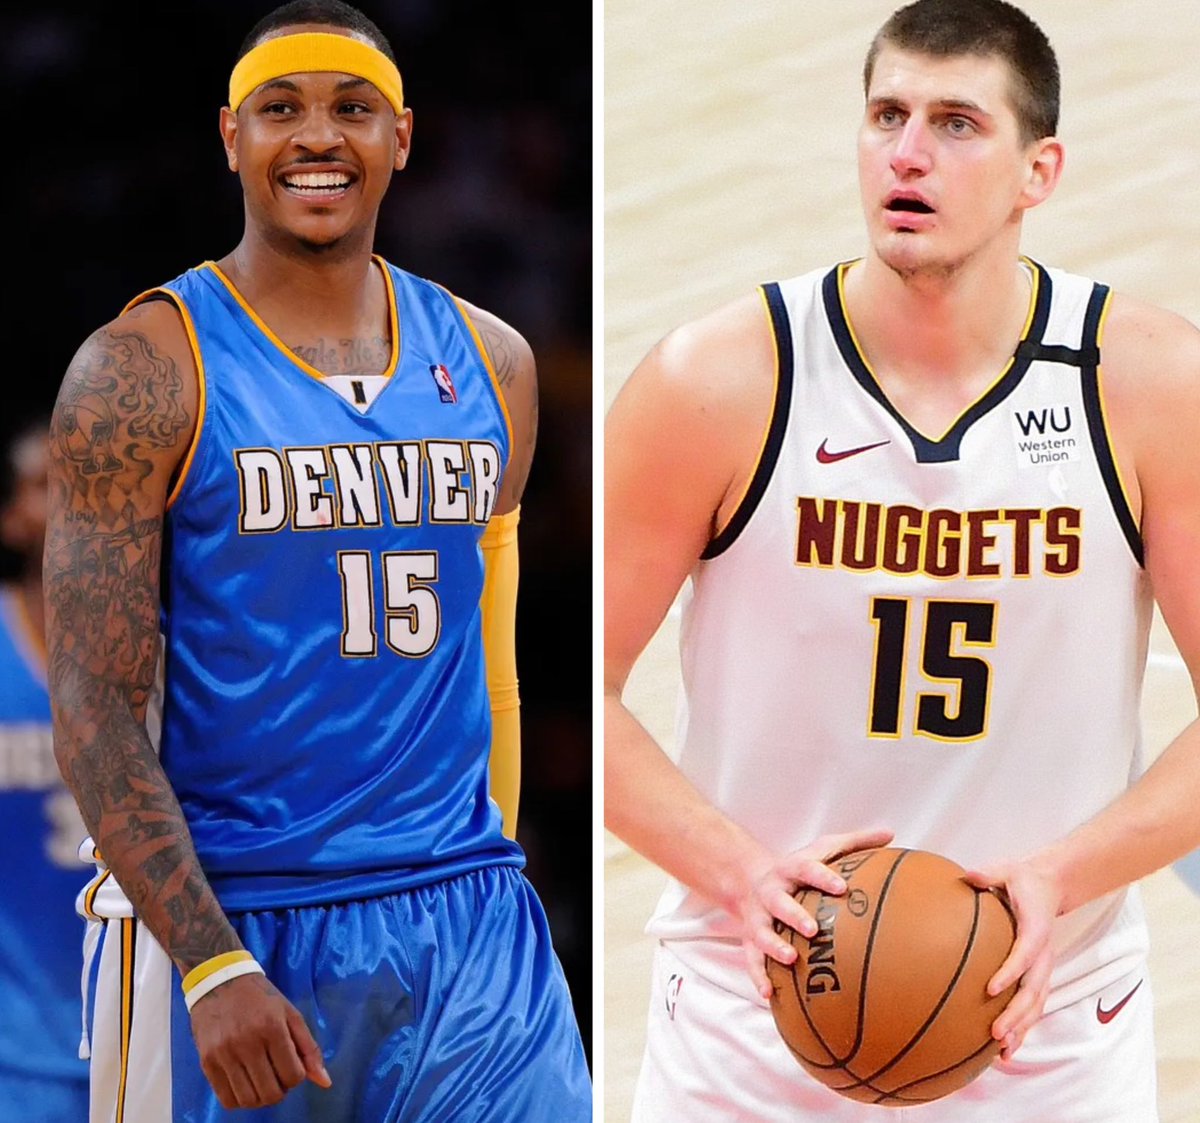 Carmelo Anthony believes the Nuggets gave Nikola Jokic the No. 15 jersey as a “petty maneuver” to “erase Melo's accomplishments”.